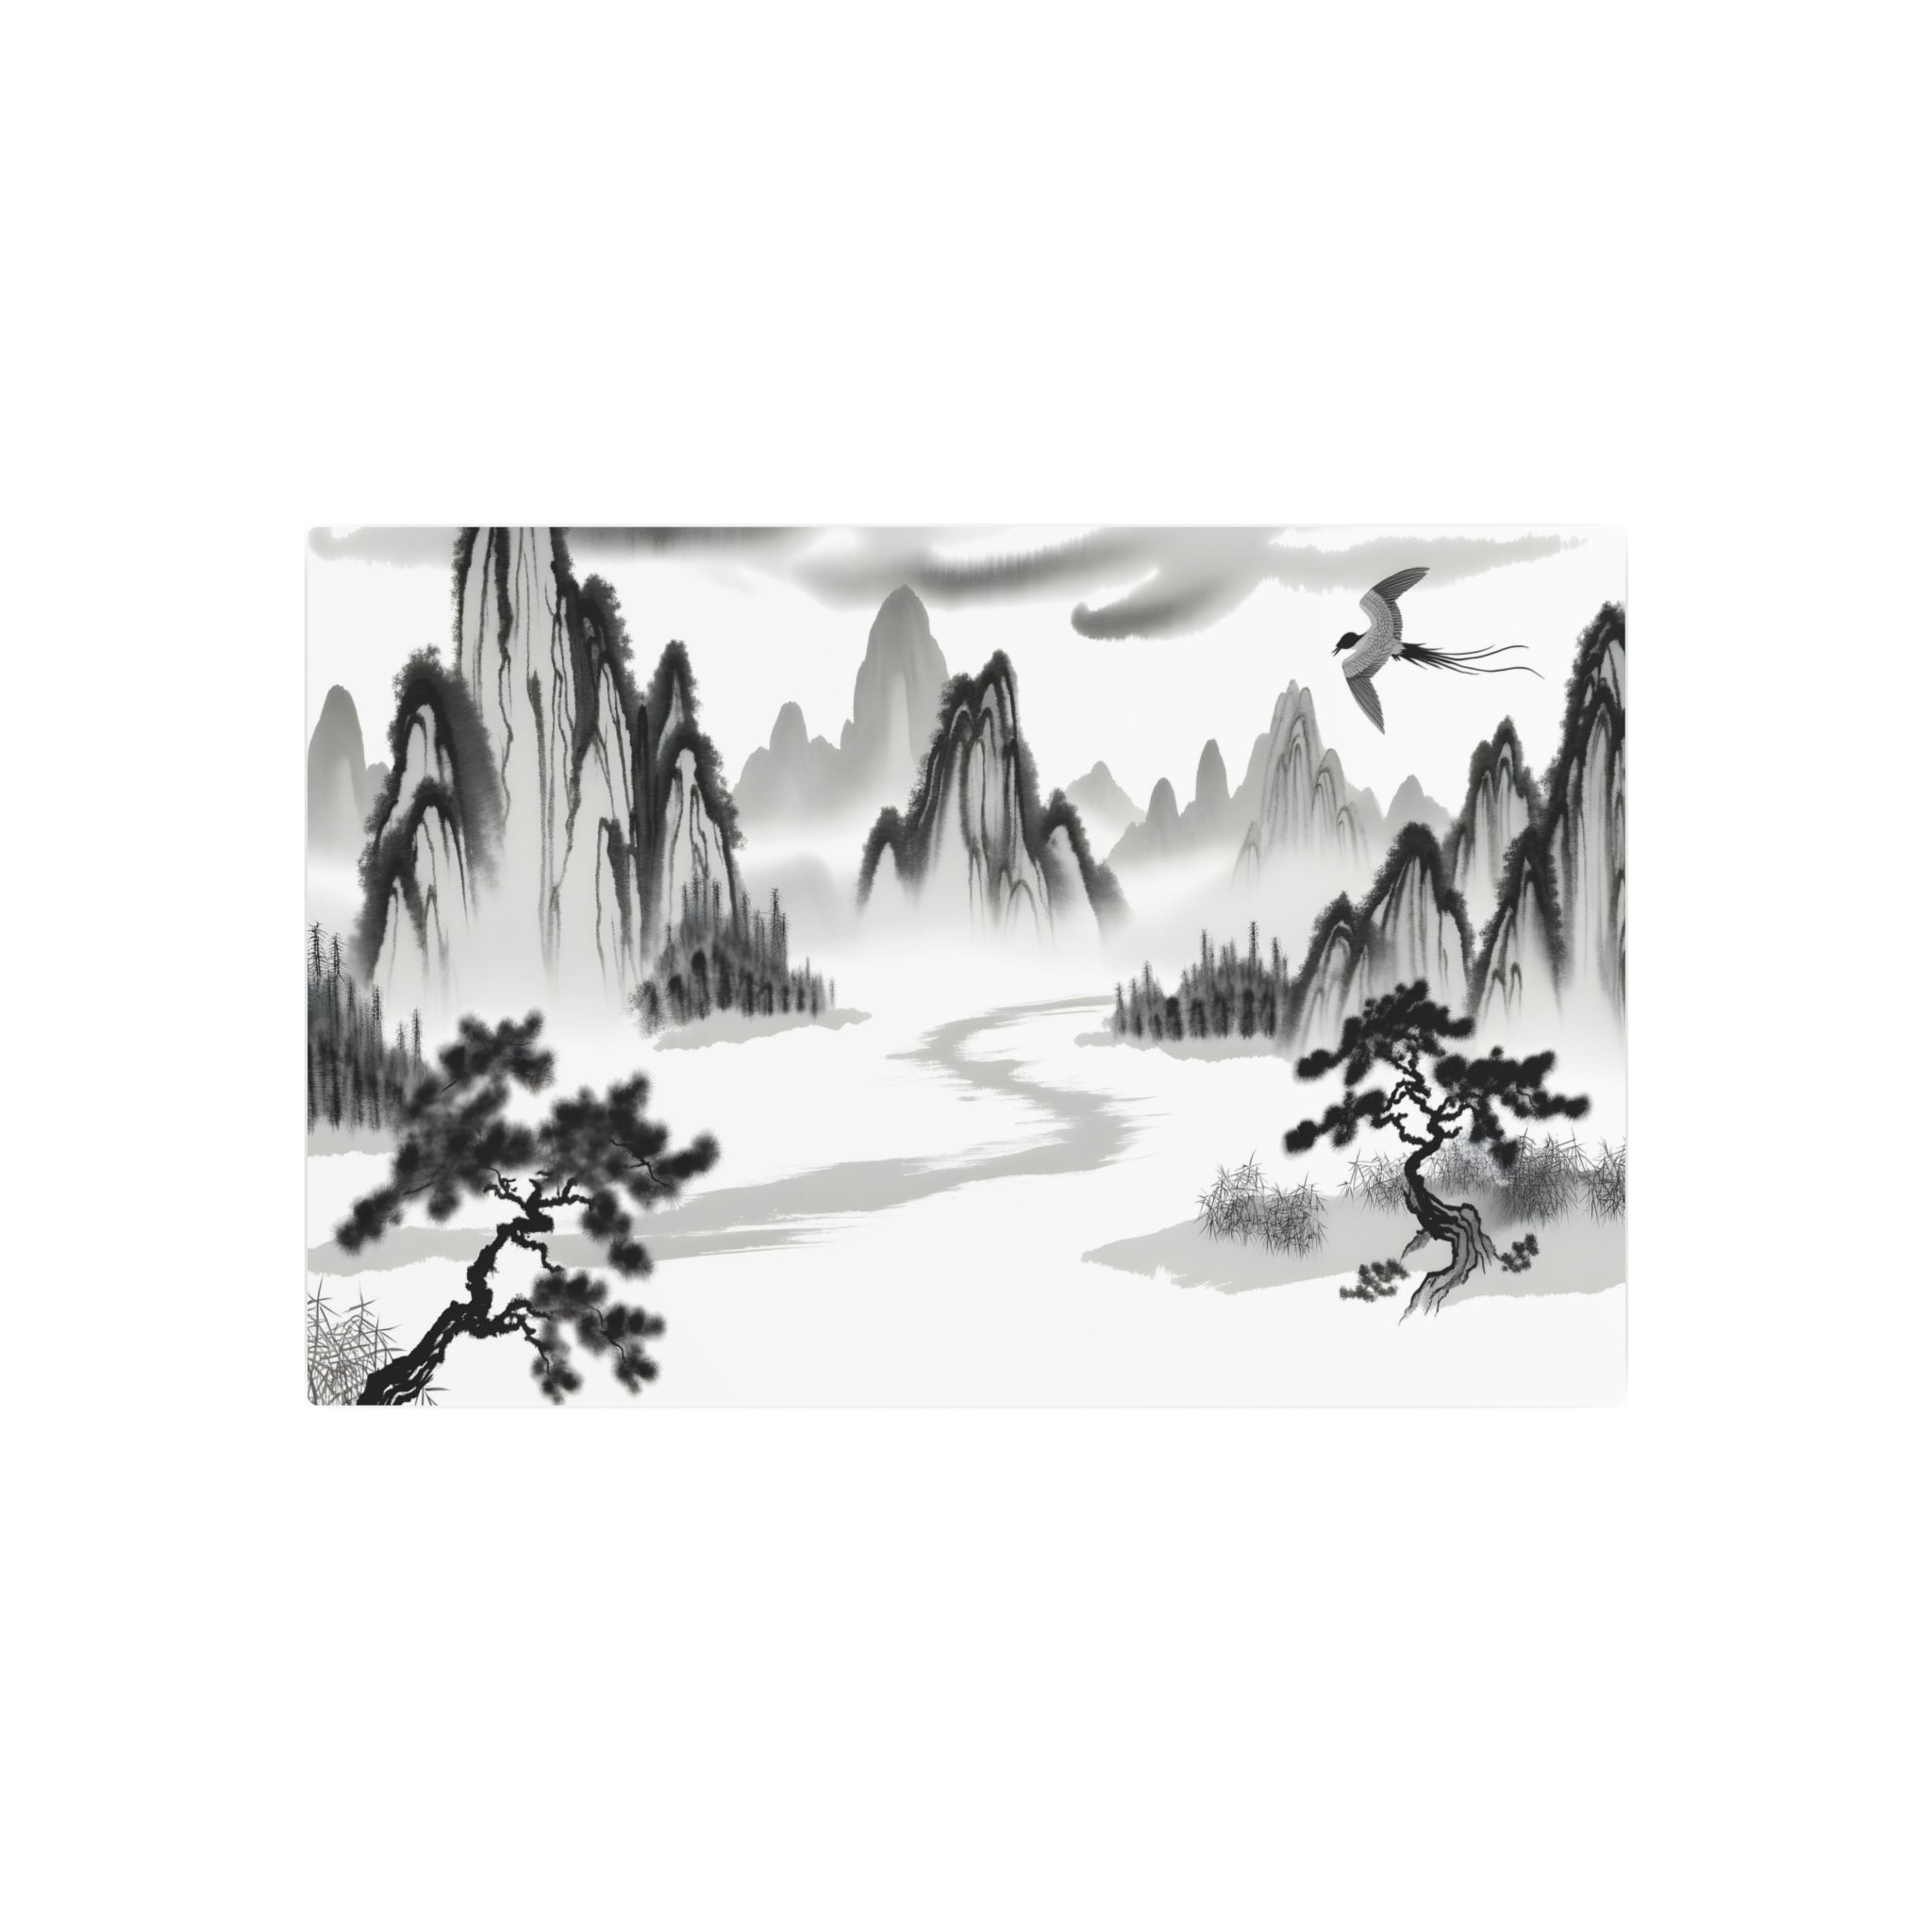 Metal Poster Art | "Traditional Chinese Landscape Artwork - Ink Wash Painting of Scenic Mountains, Serene Trees, Winding River and Bird in Flight - Asian Art Styles - Metal Poster Art 30″ x 20″ (Horizontal) 0.12''